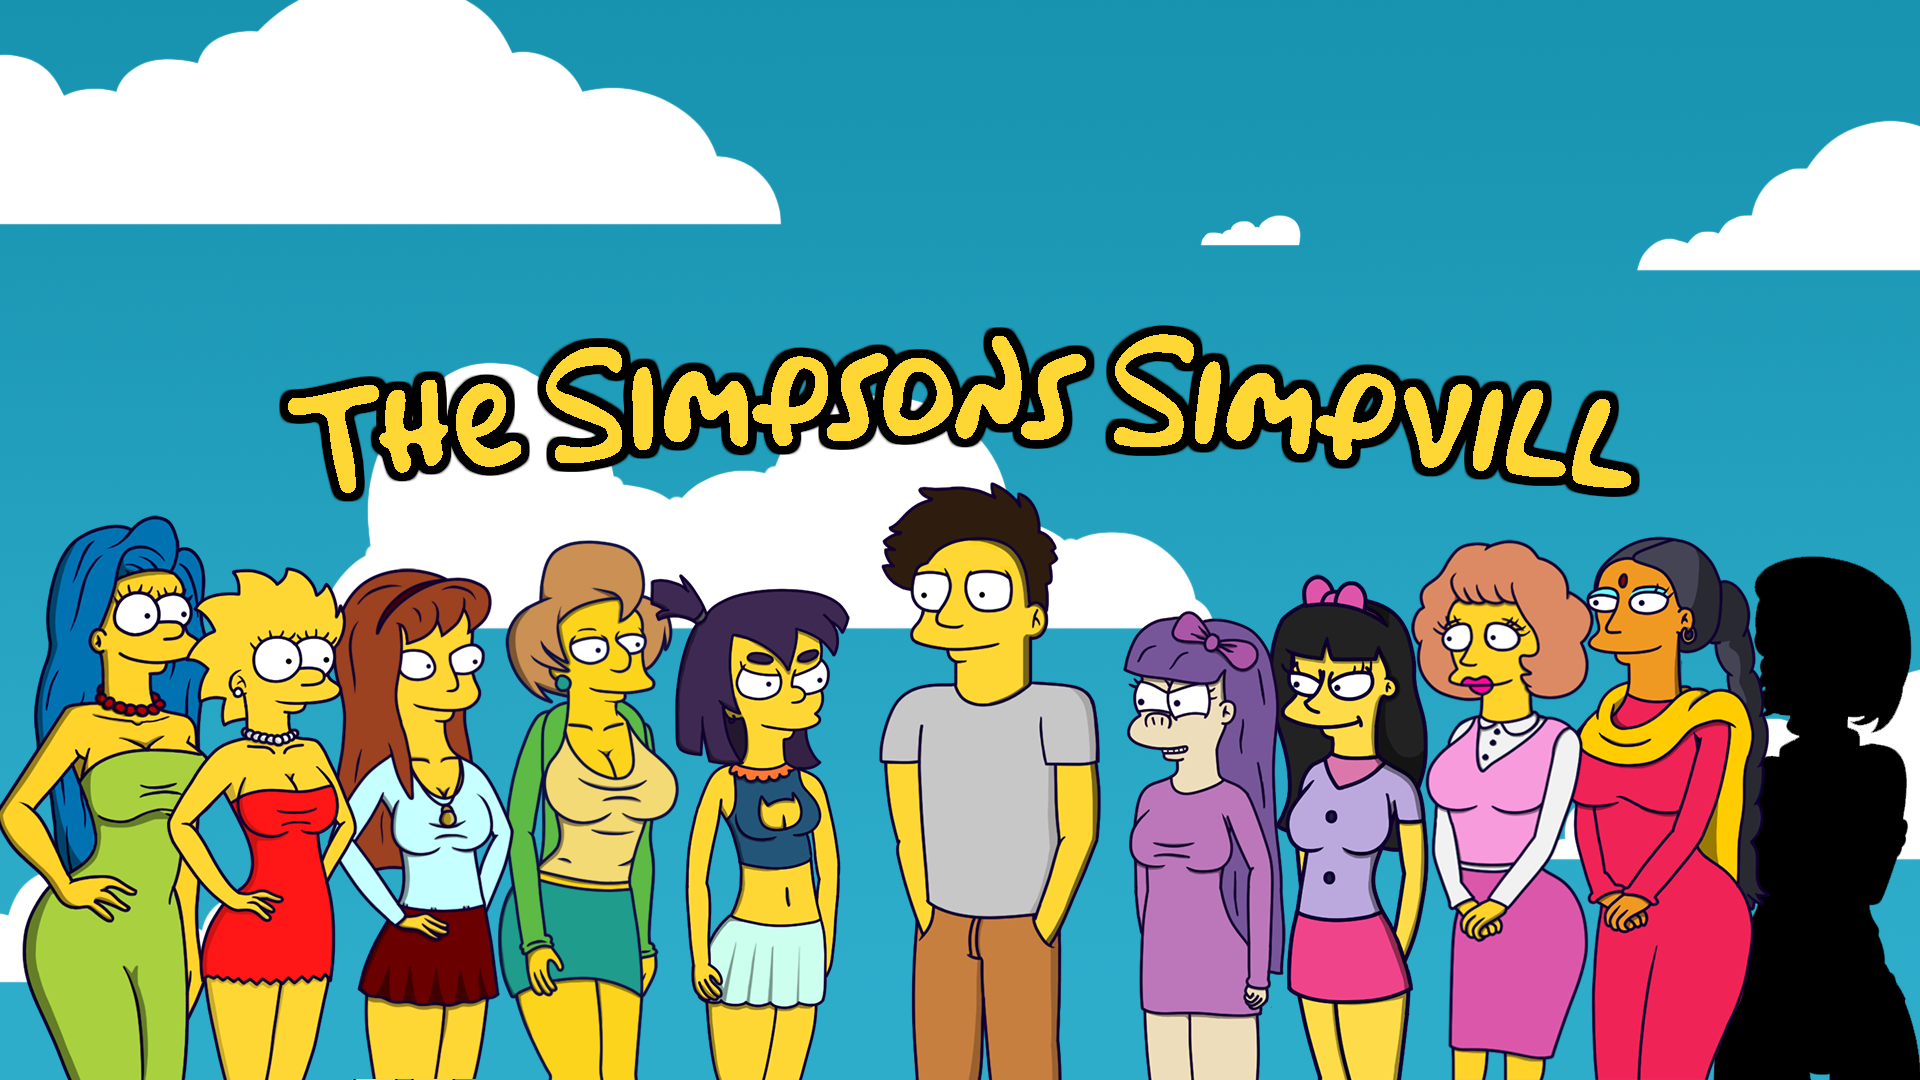 Comments 46 to 7 of 46 - The Simpsons Simpvill V1.03 by Squizzy